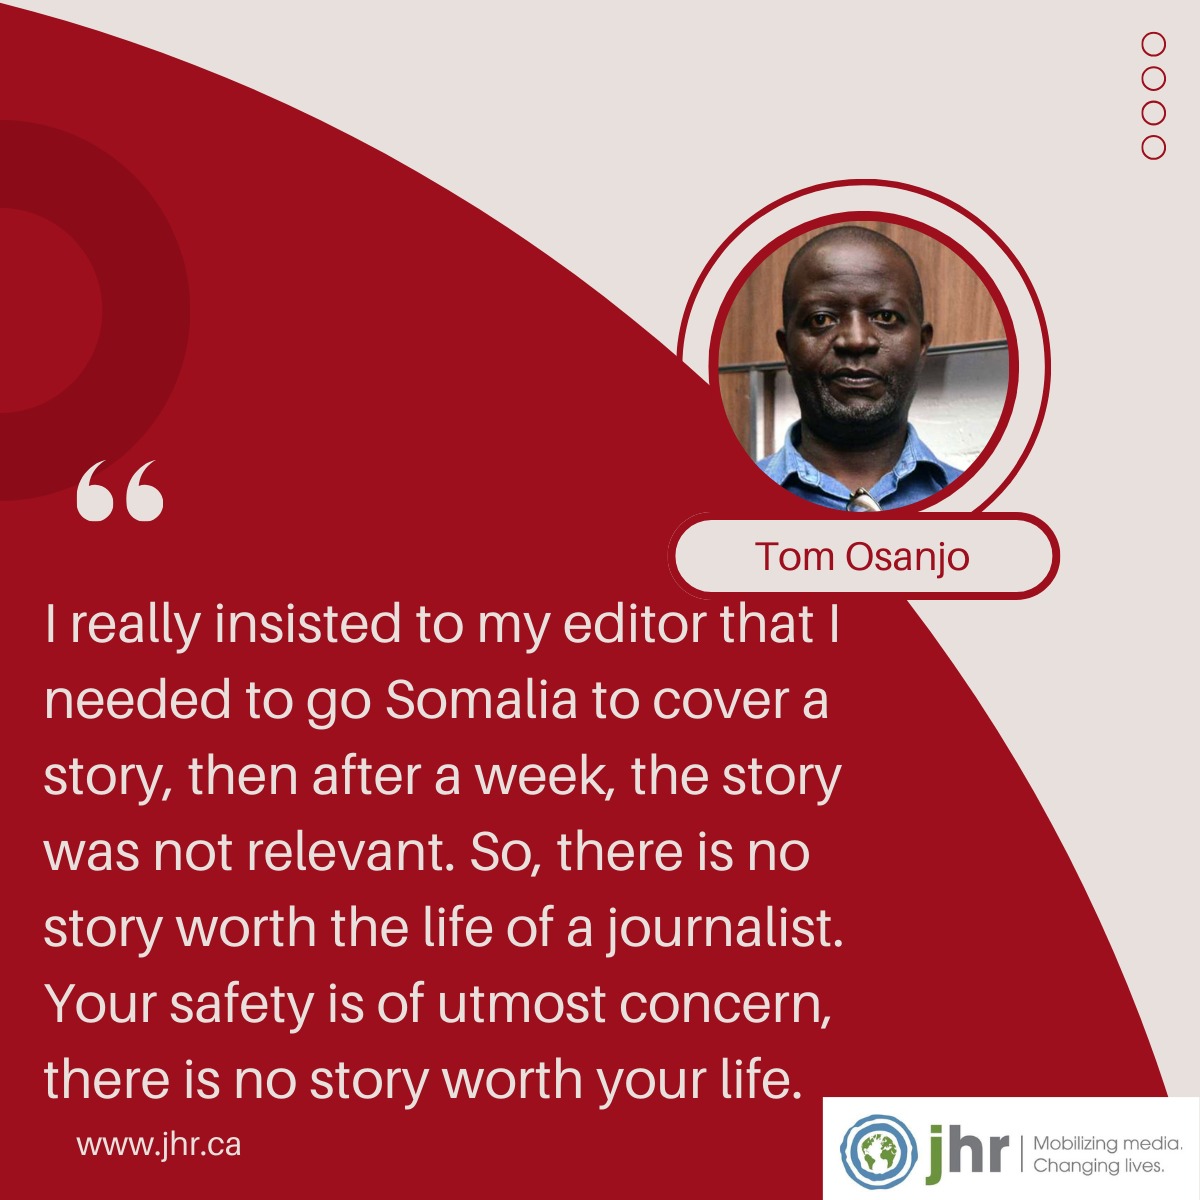 As a #journalist there is no story worth your life. @jhrnews @MoiUniKenya @mercymnjoroge @MustaphaDumbuya @Gillylangat @nabooker